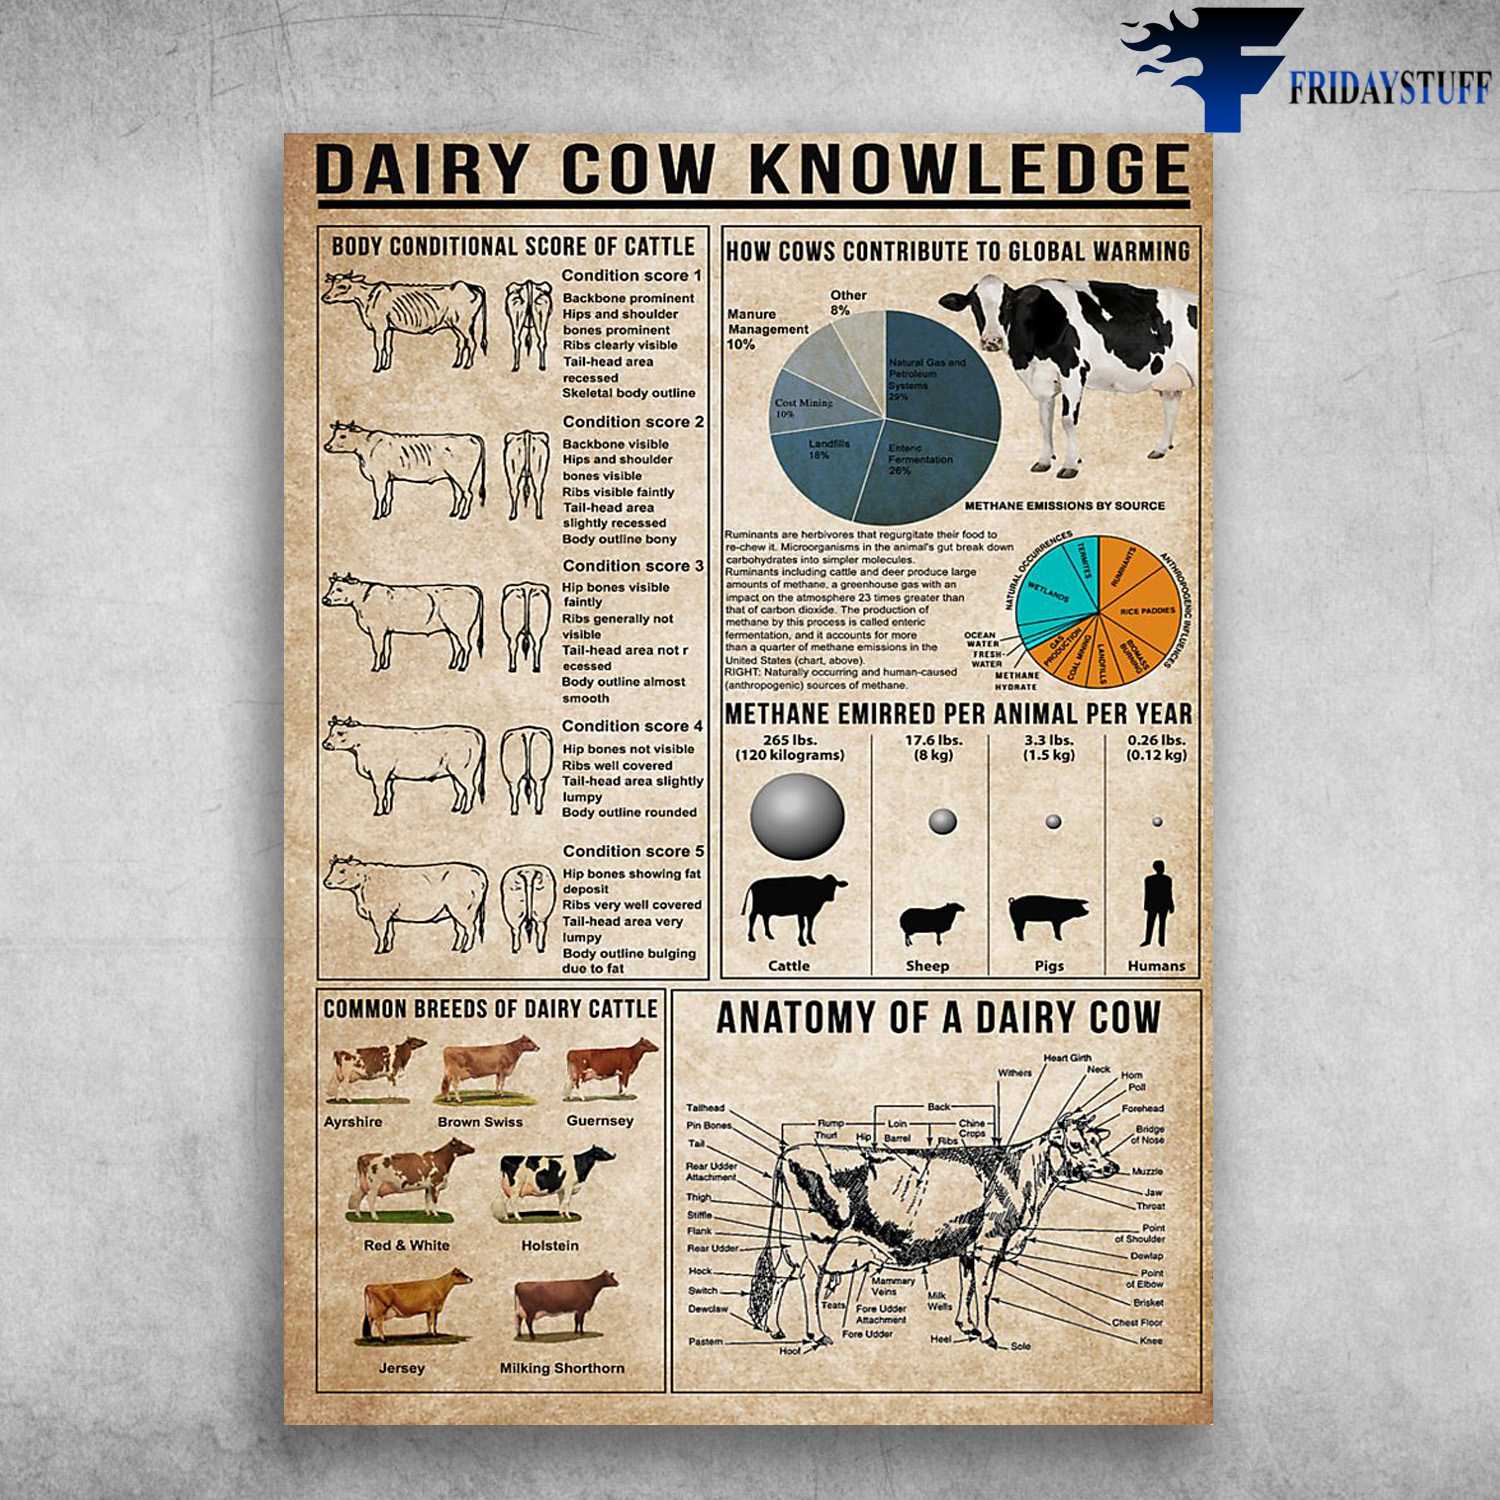 Dairy Cow Knowledge - Body Conditional Score Of Cattle, How Cows Contribute To Global Warning, Common Breeds Of Dairy, Anatomy Of A Dairy Cow